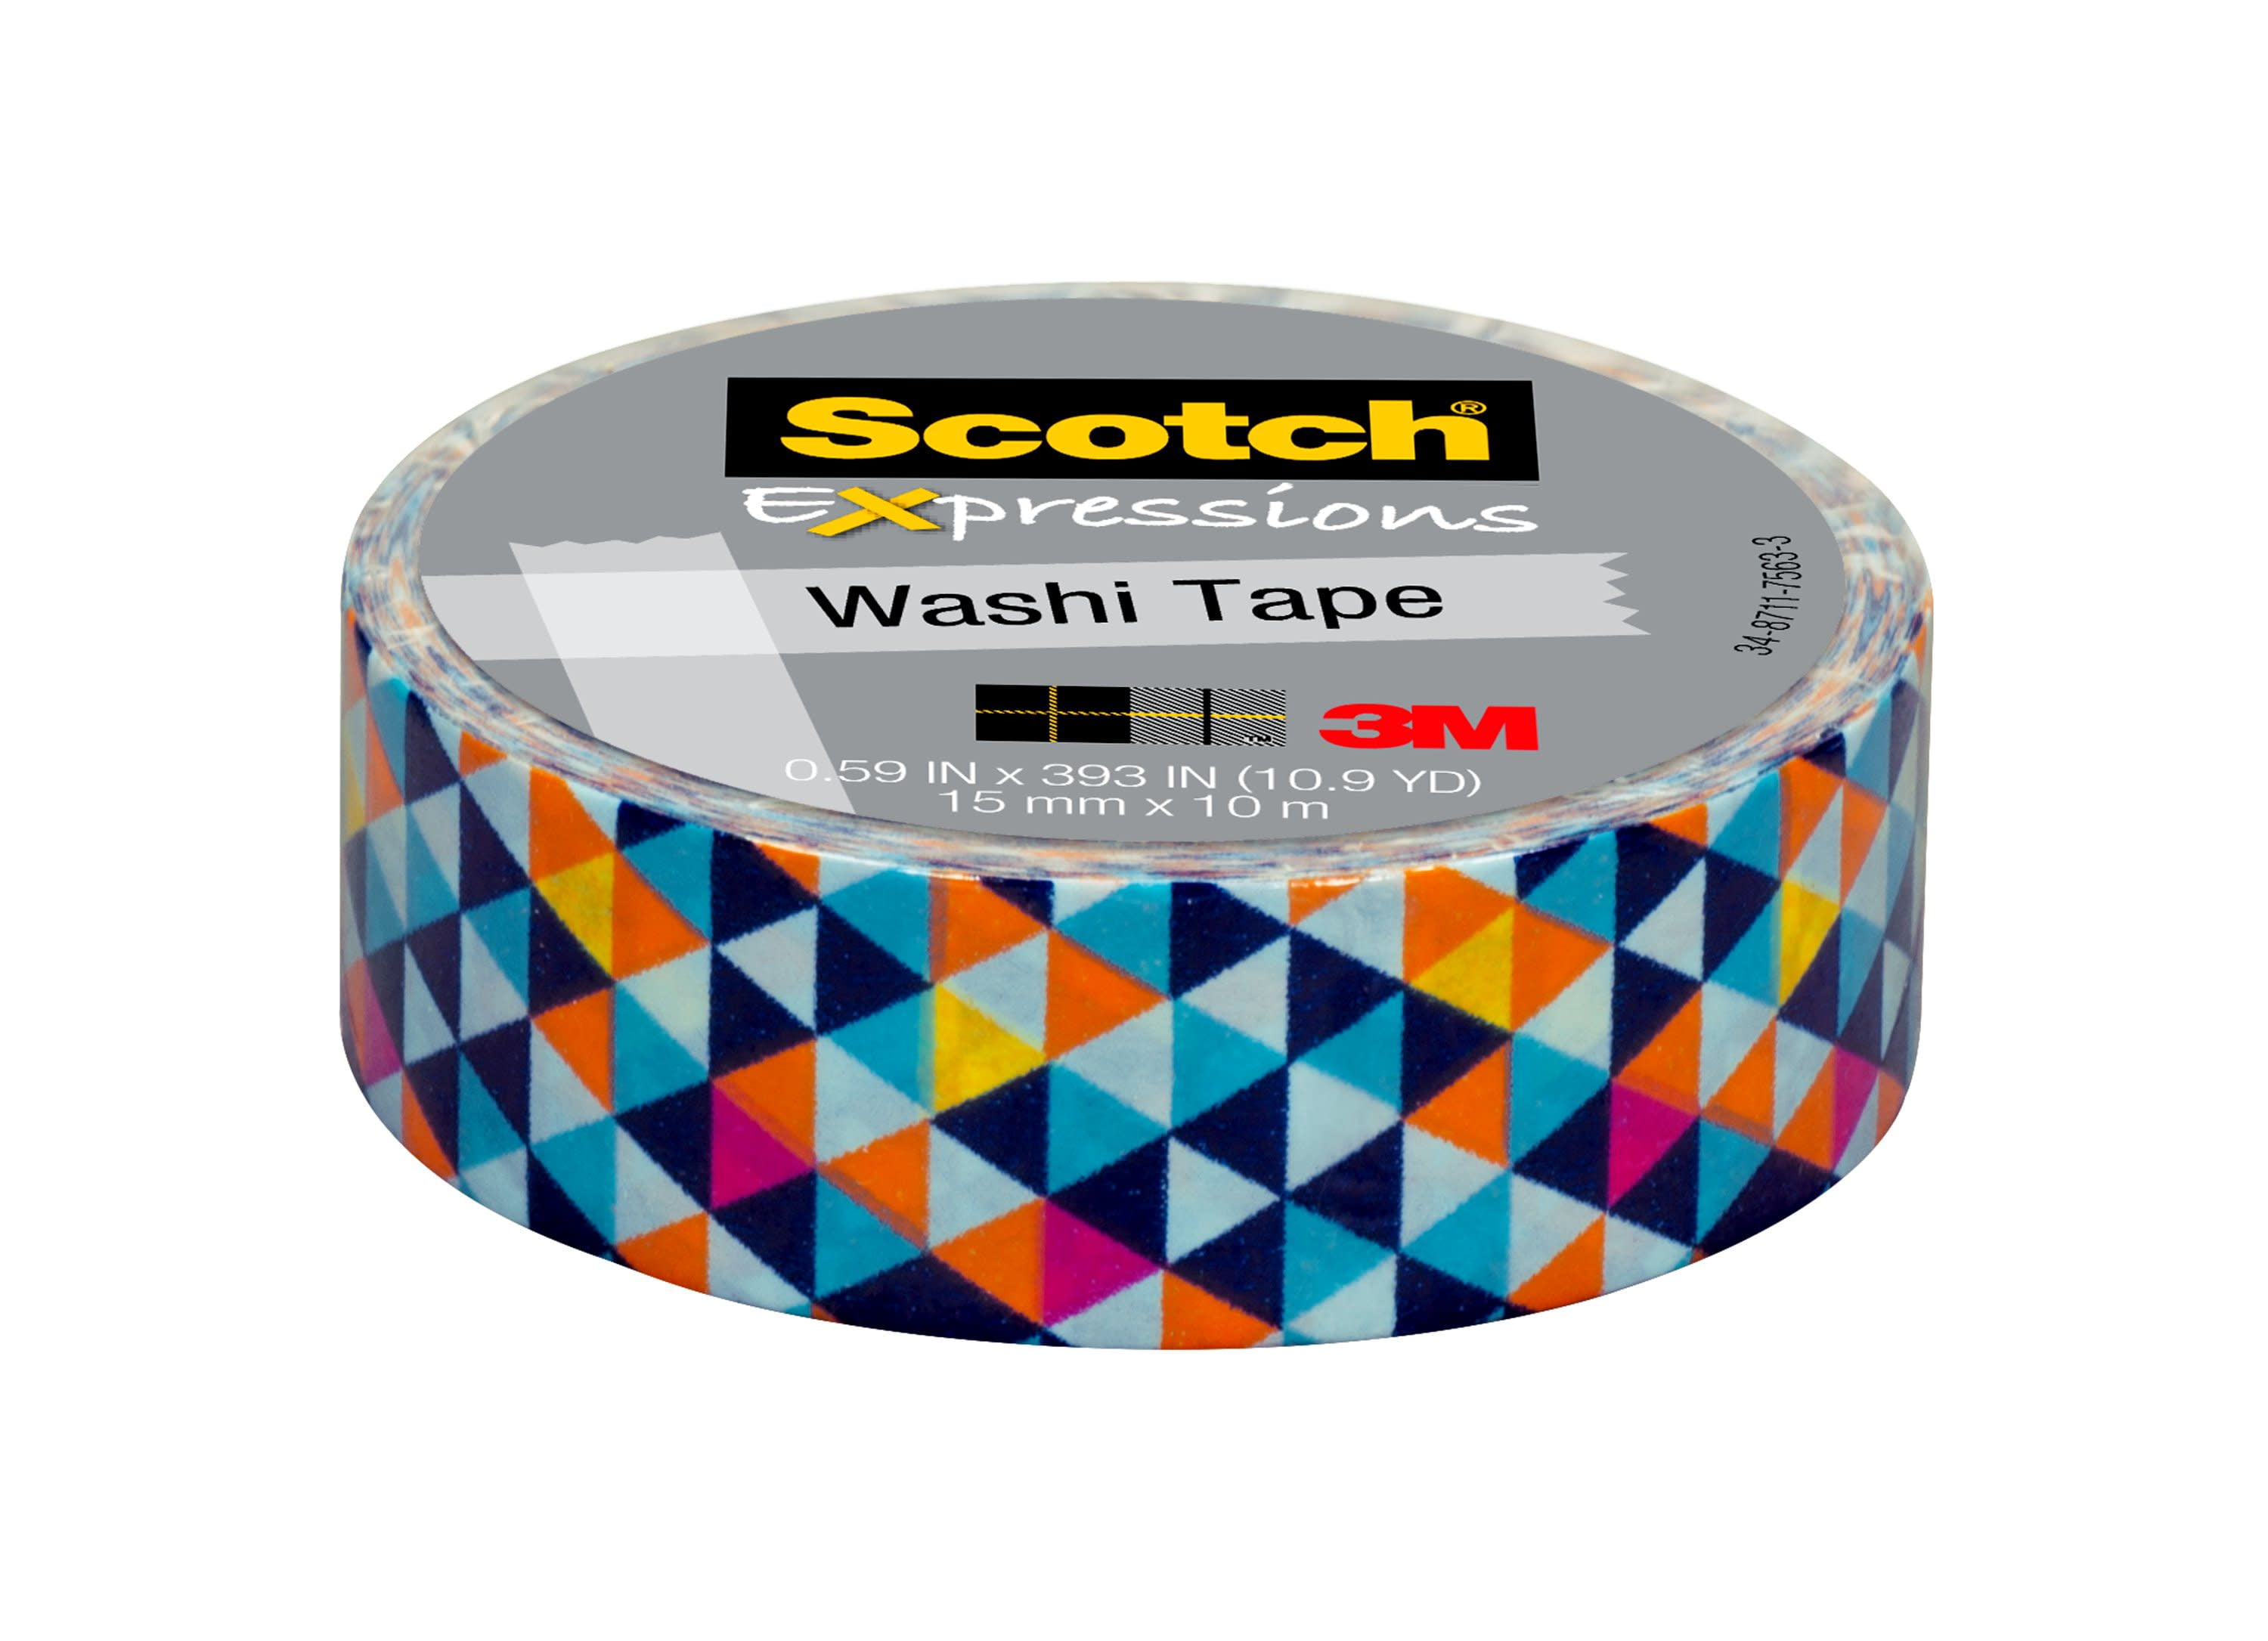 Planner Tape Washi Planner Accessories Washi Tape Set 2 Washi Tape by Recollections Washi Tape Samples 24 inch samples only